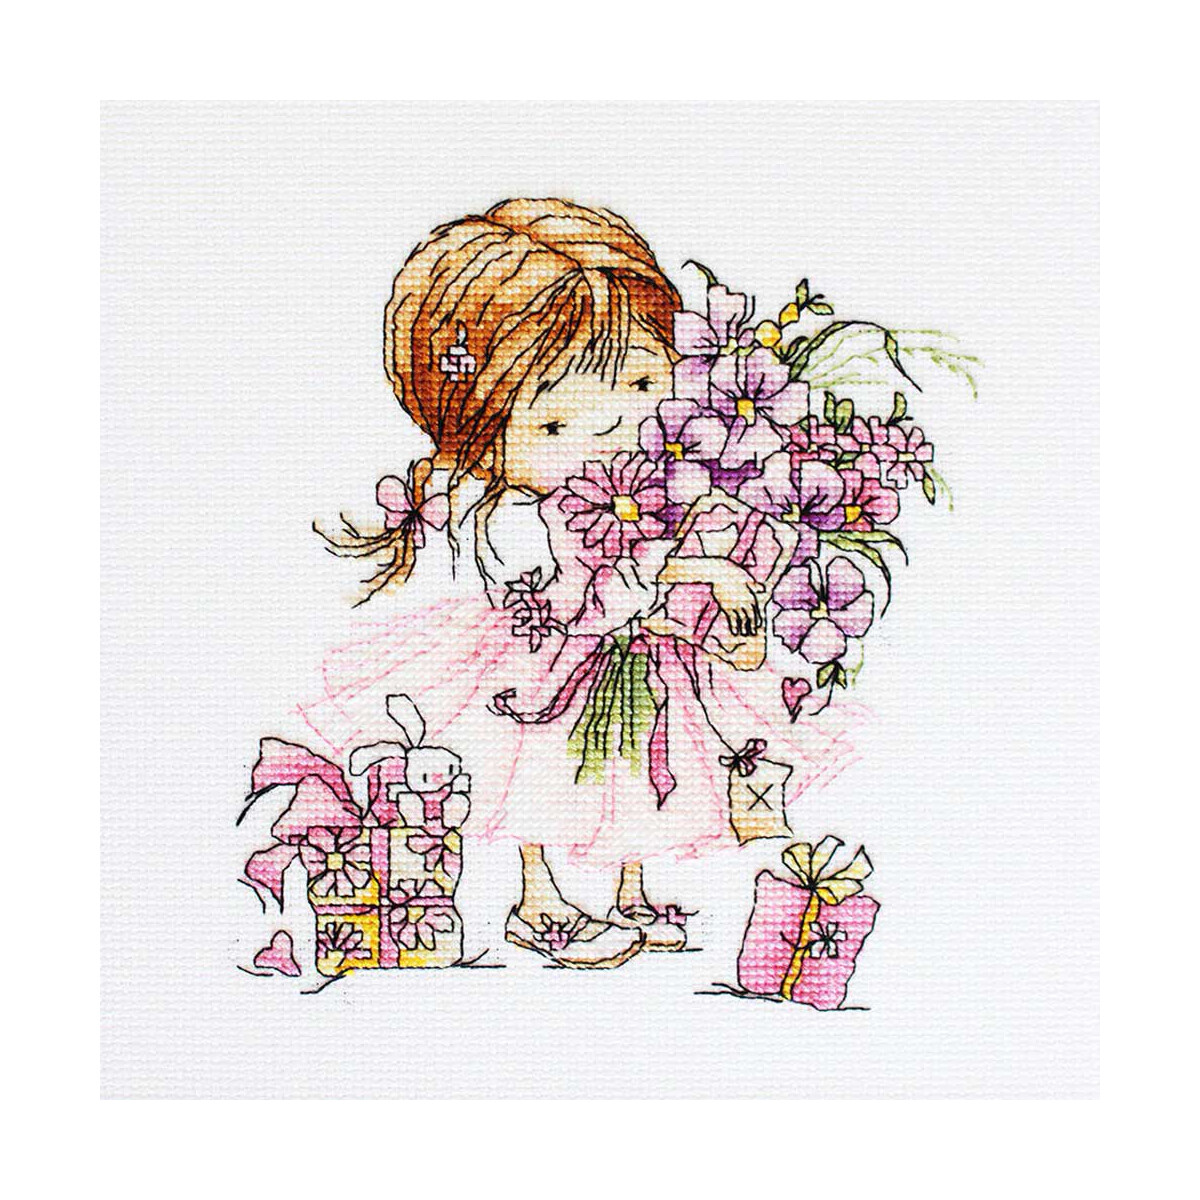 Luca-S counted Cross Stitch kit "Girl with a...